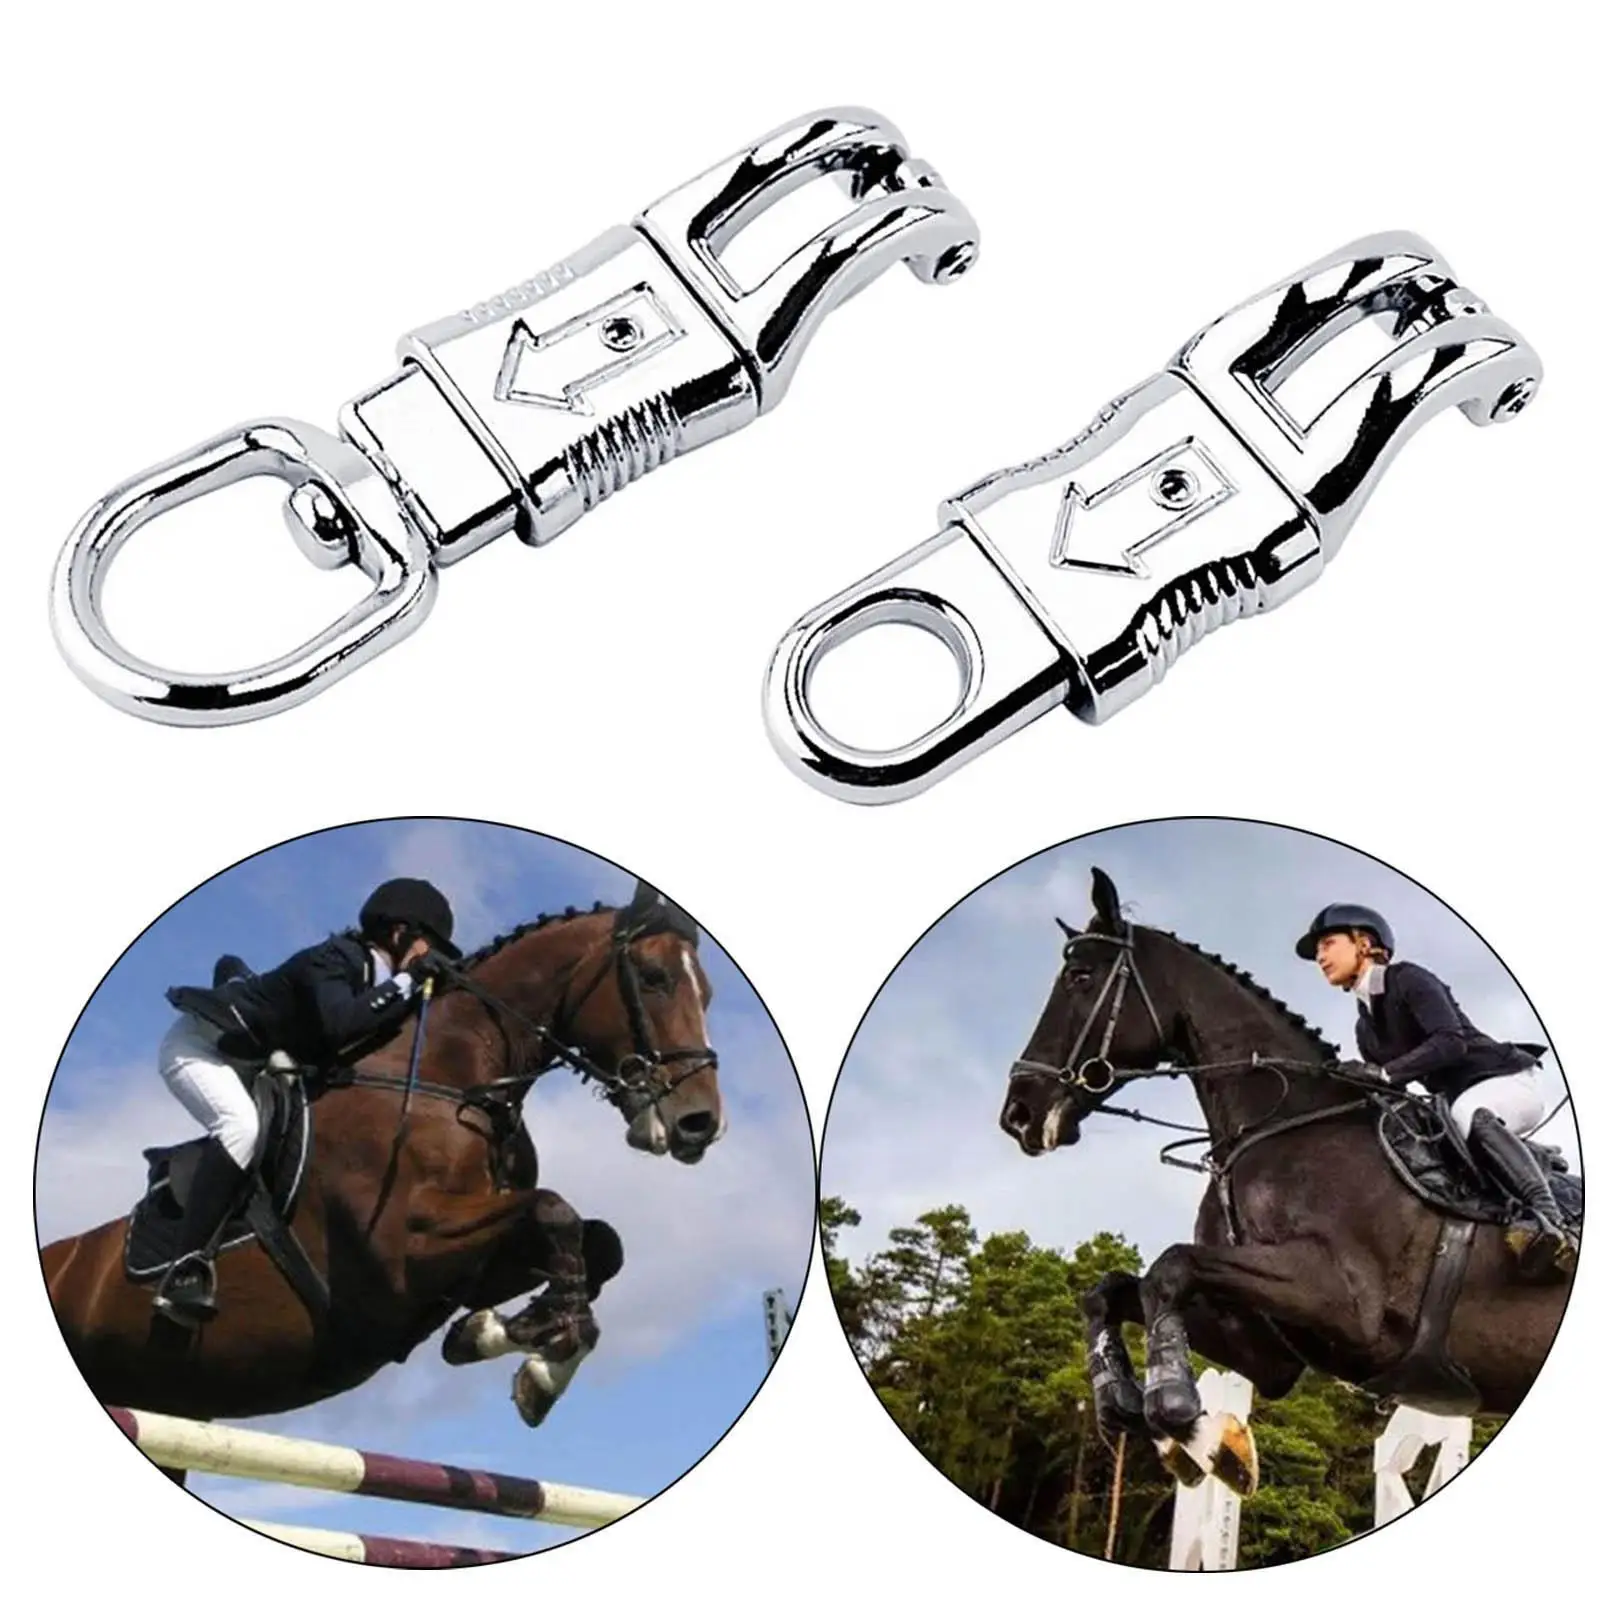 Panic Snap for Paracord Quick Release Equestrian Leads Reins Hook Fit for Horse Riding